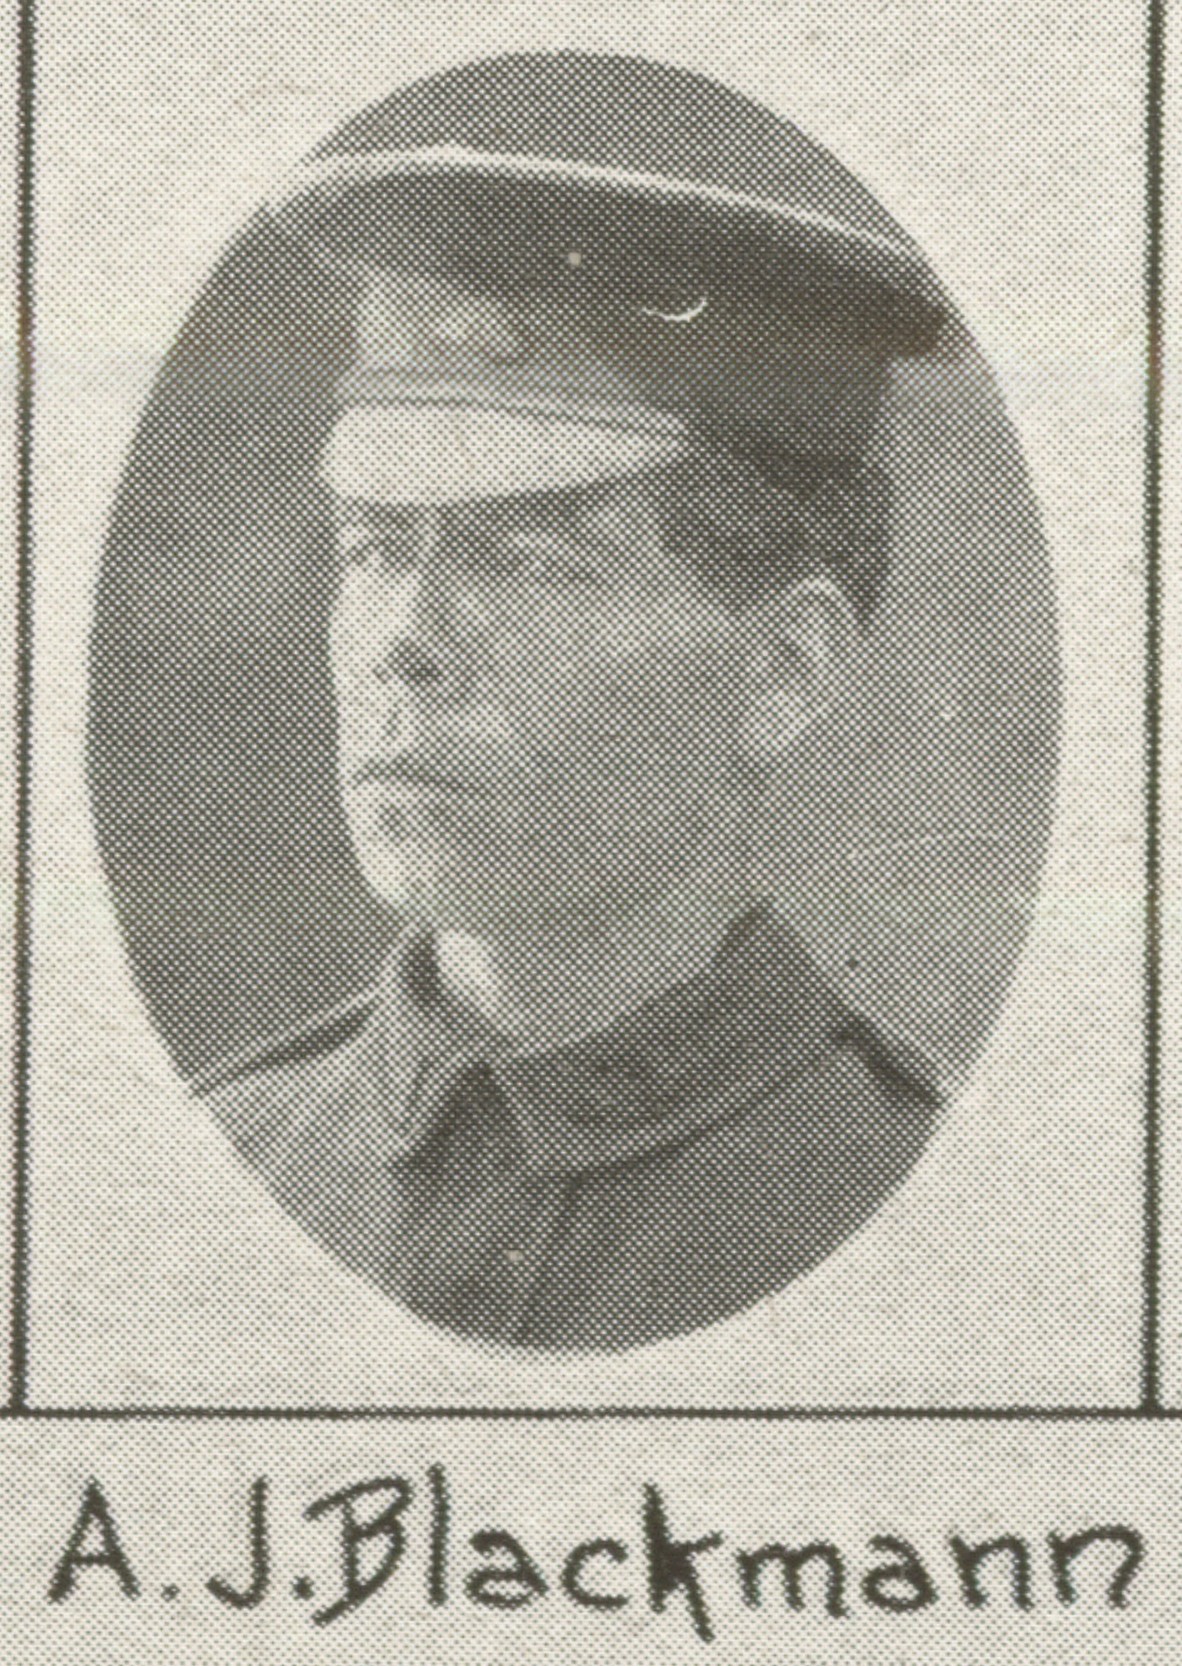 A.J. Blackmann one of the soldiers photographed in The Queenslander Pictorial supplement to The Queenslander 1917.